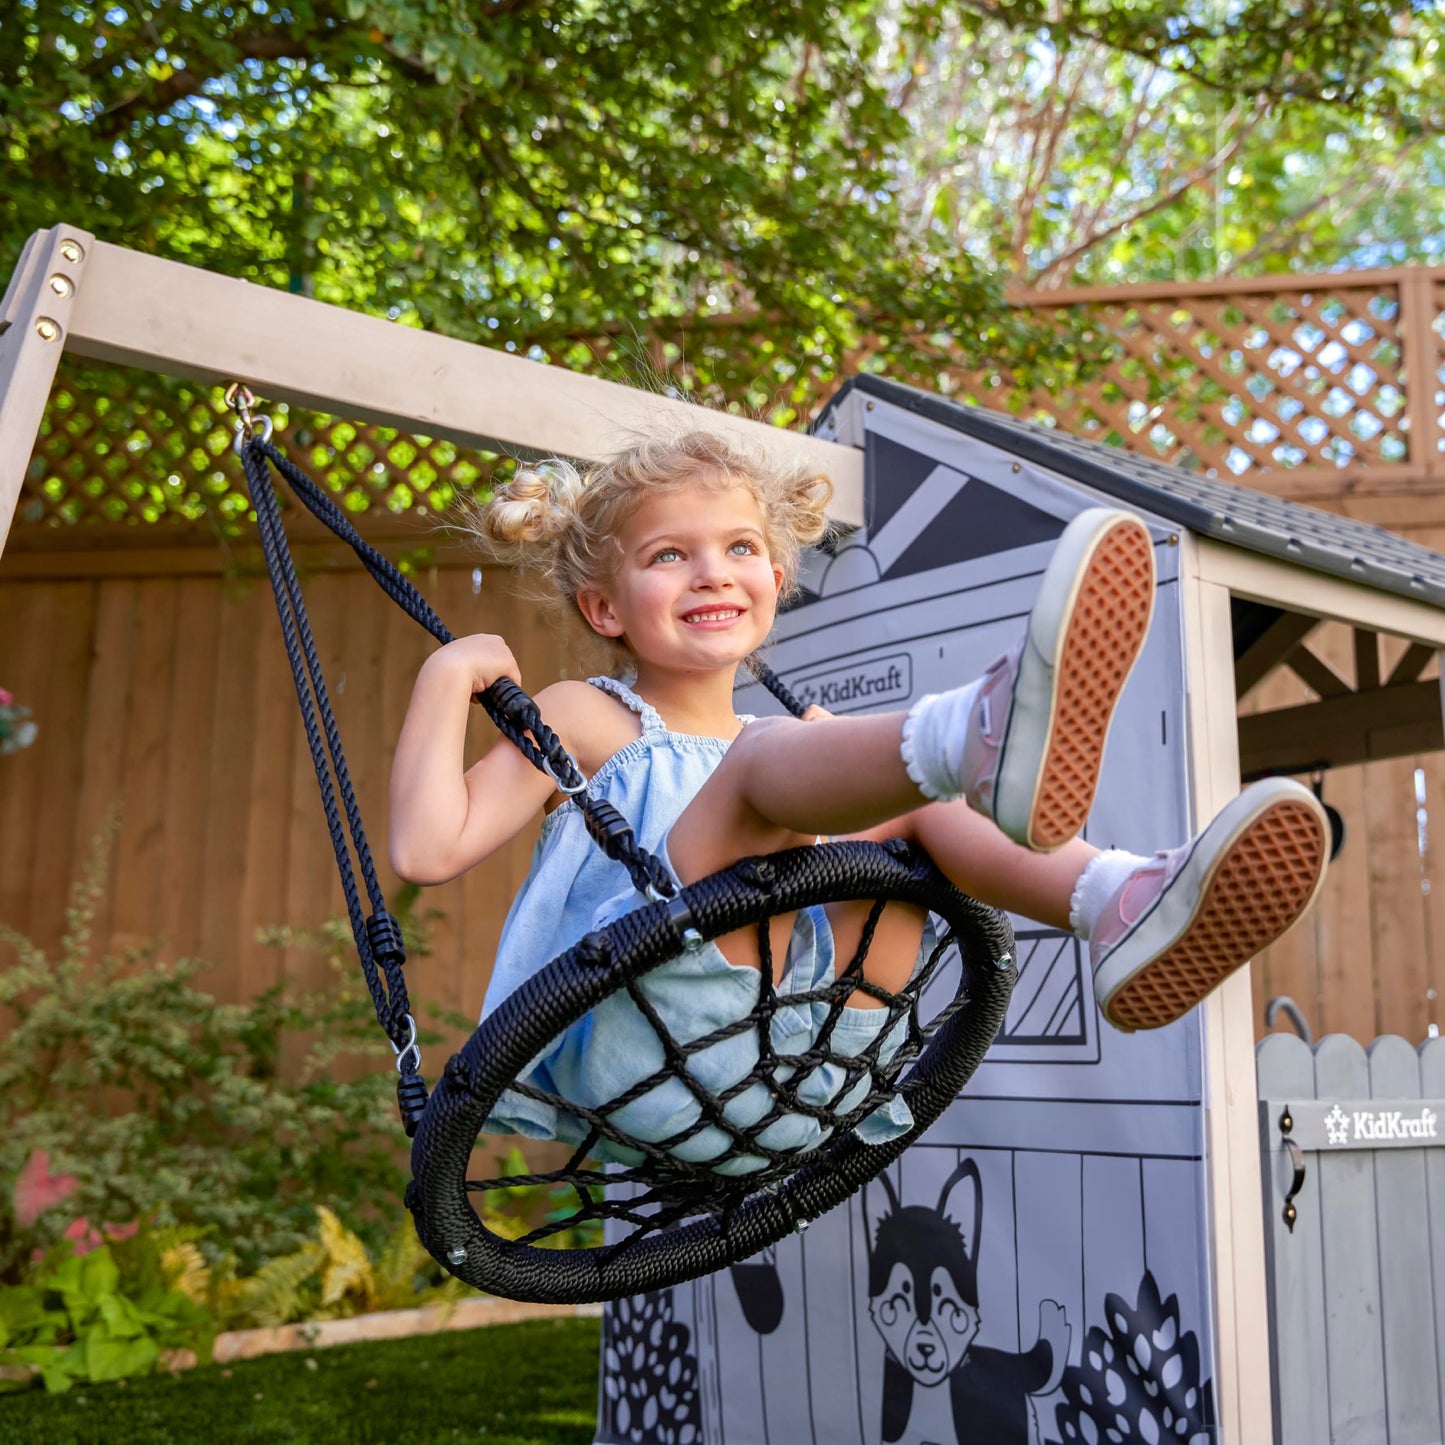 KidKraft Savannah Swing Wooden Outdoor Playhouse with Web Swing and Play Kitchen